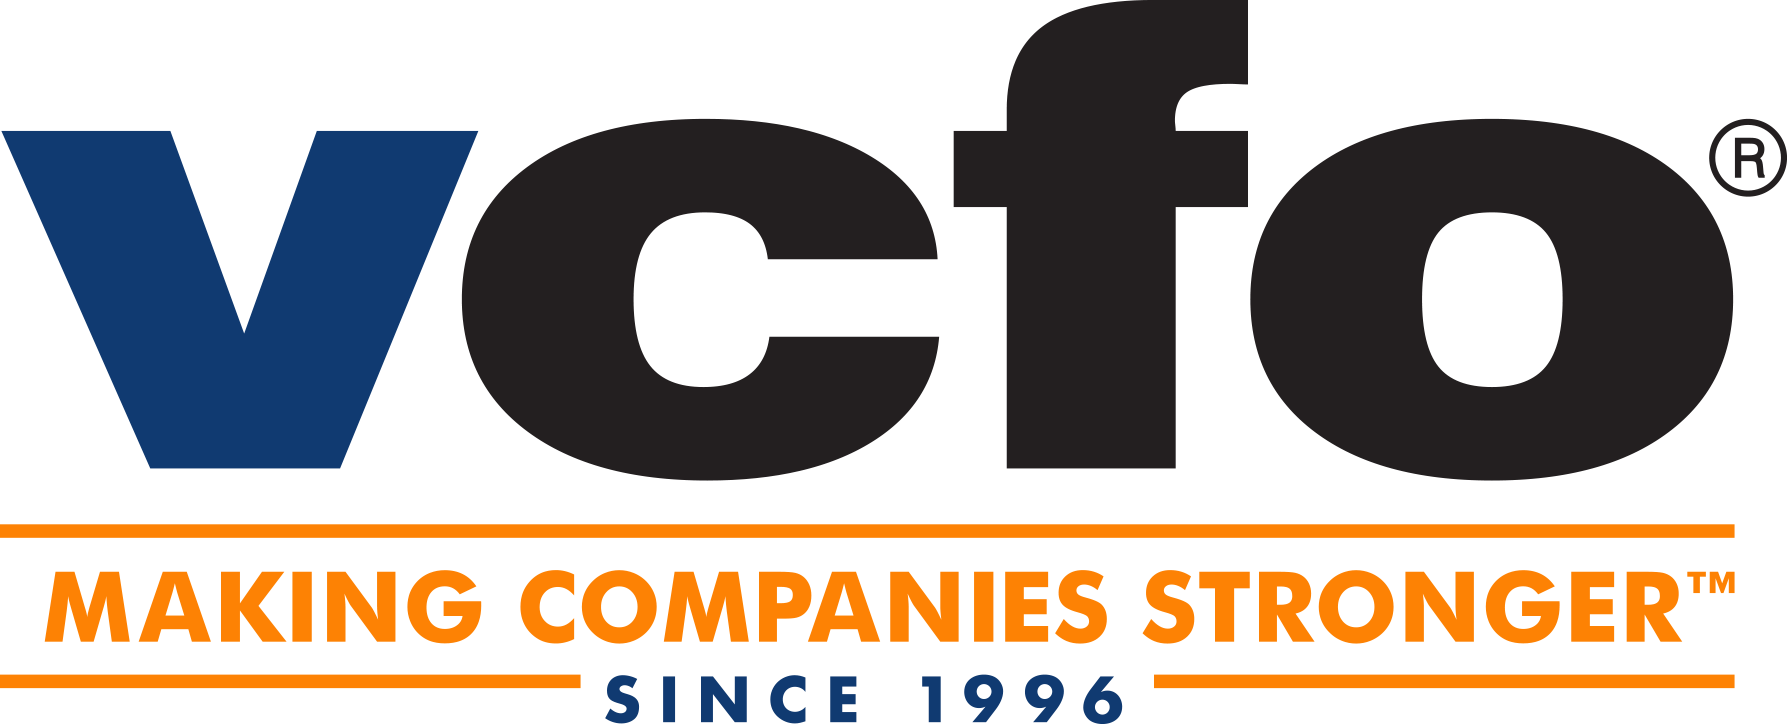 vcfo | Making Companies Stronger since 1996